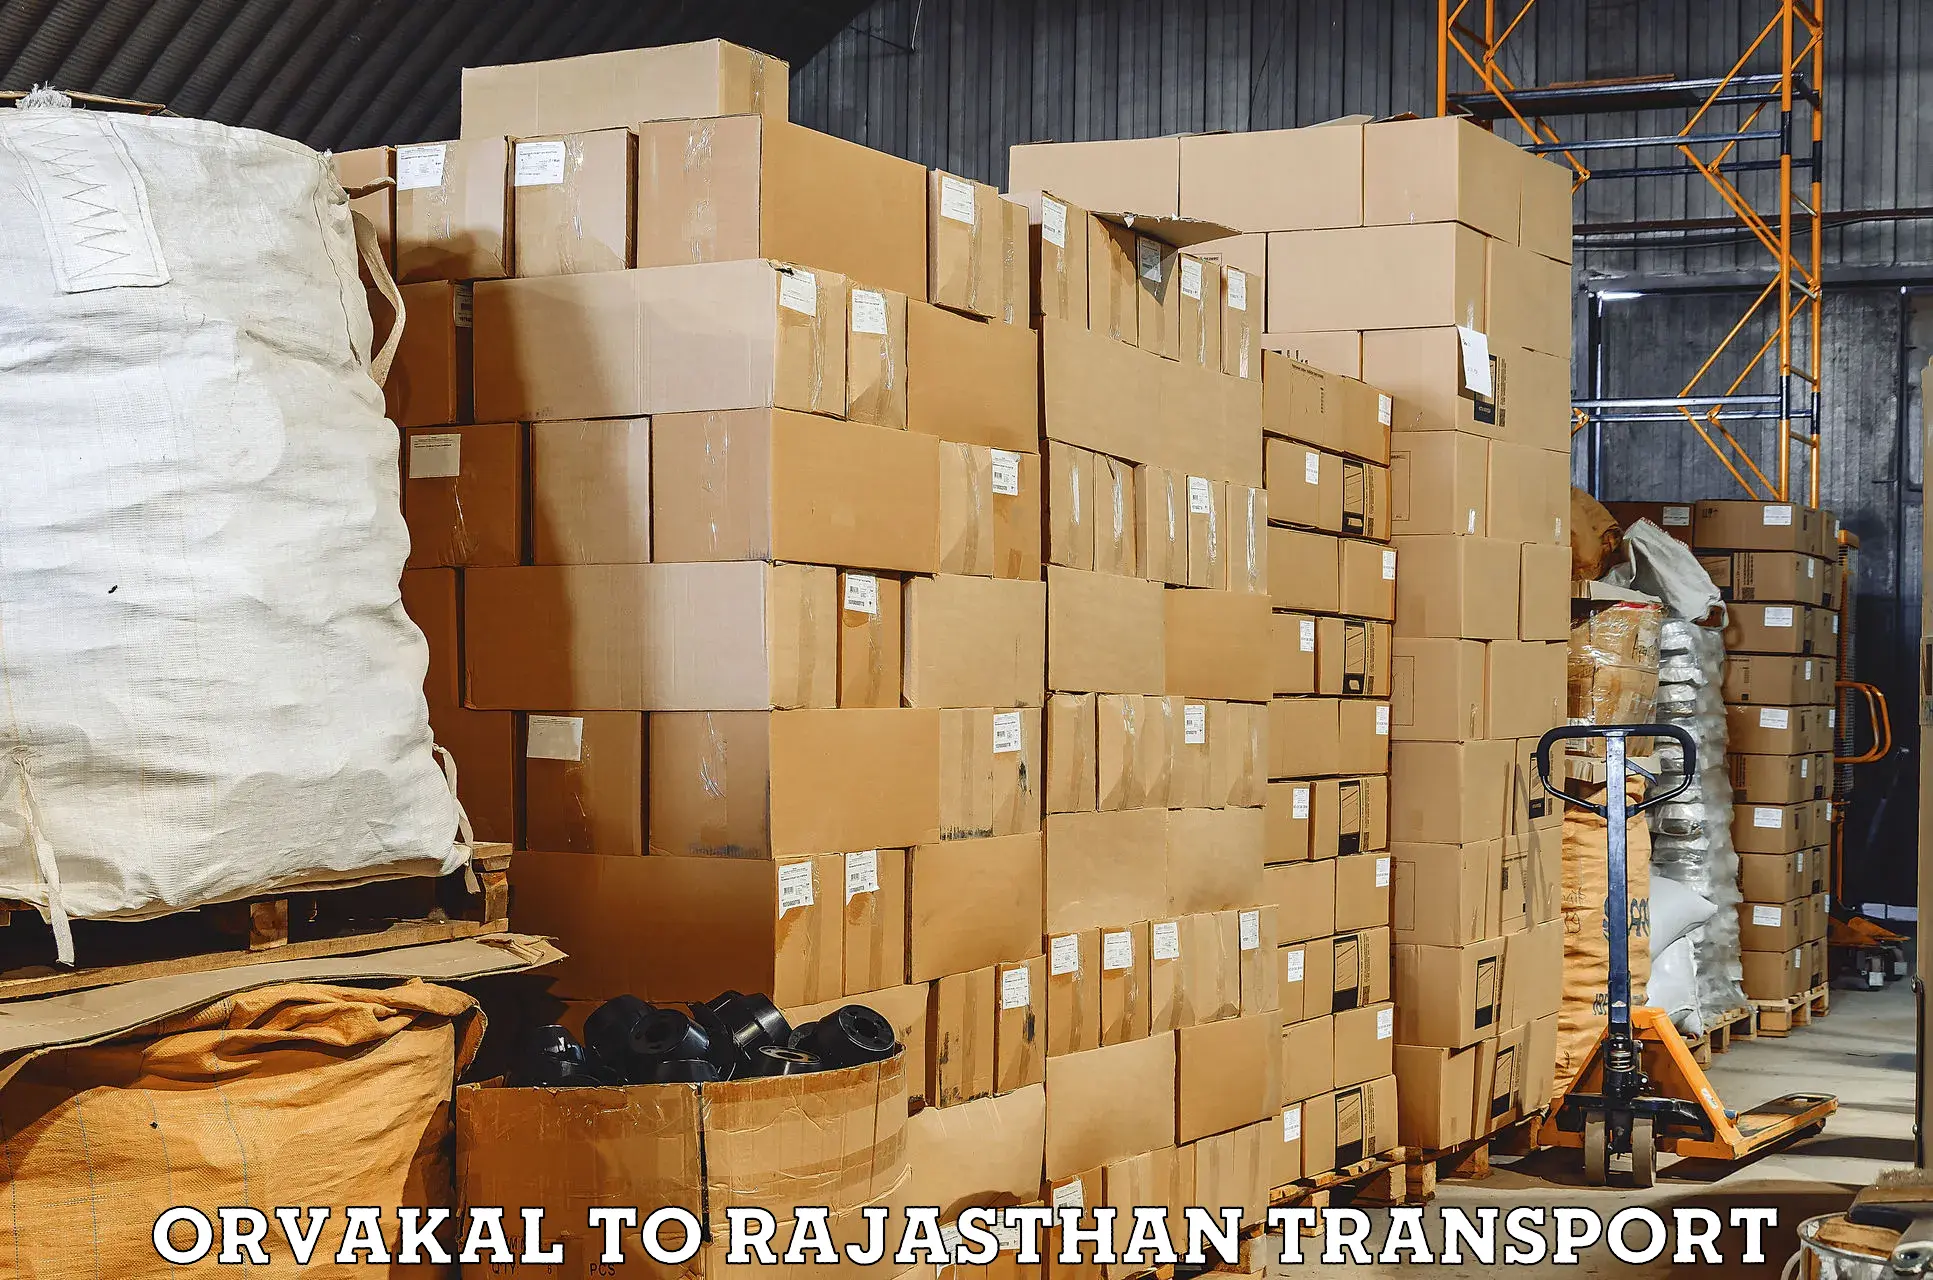 Truck transport companies in India Orvakal to Degana